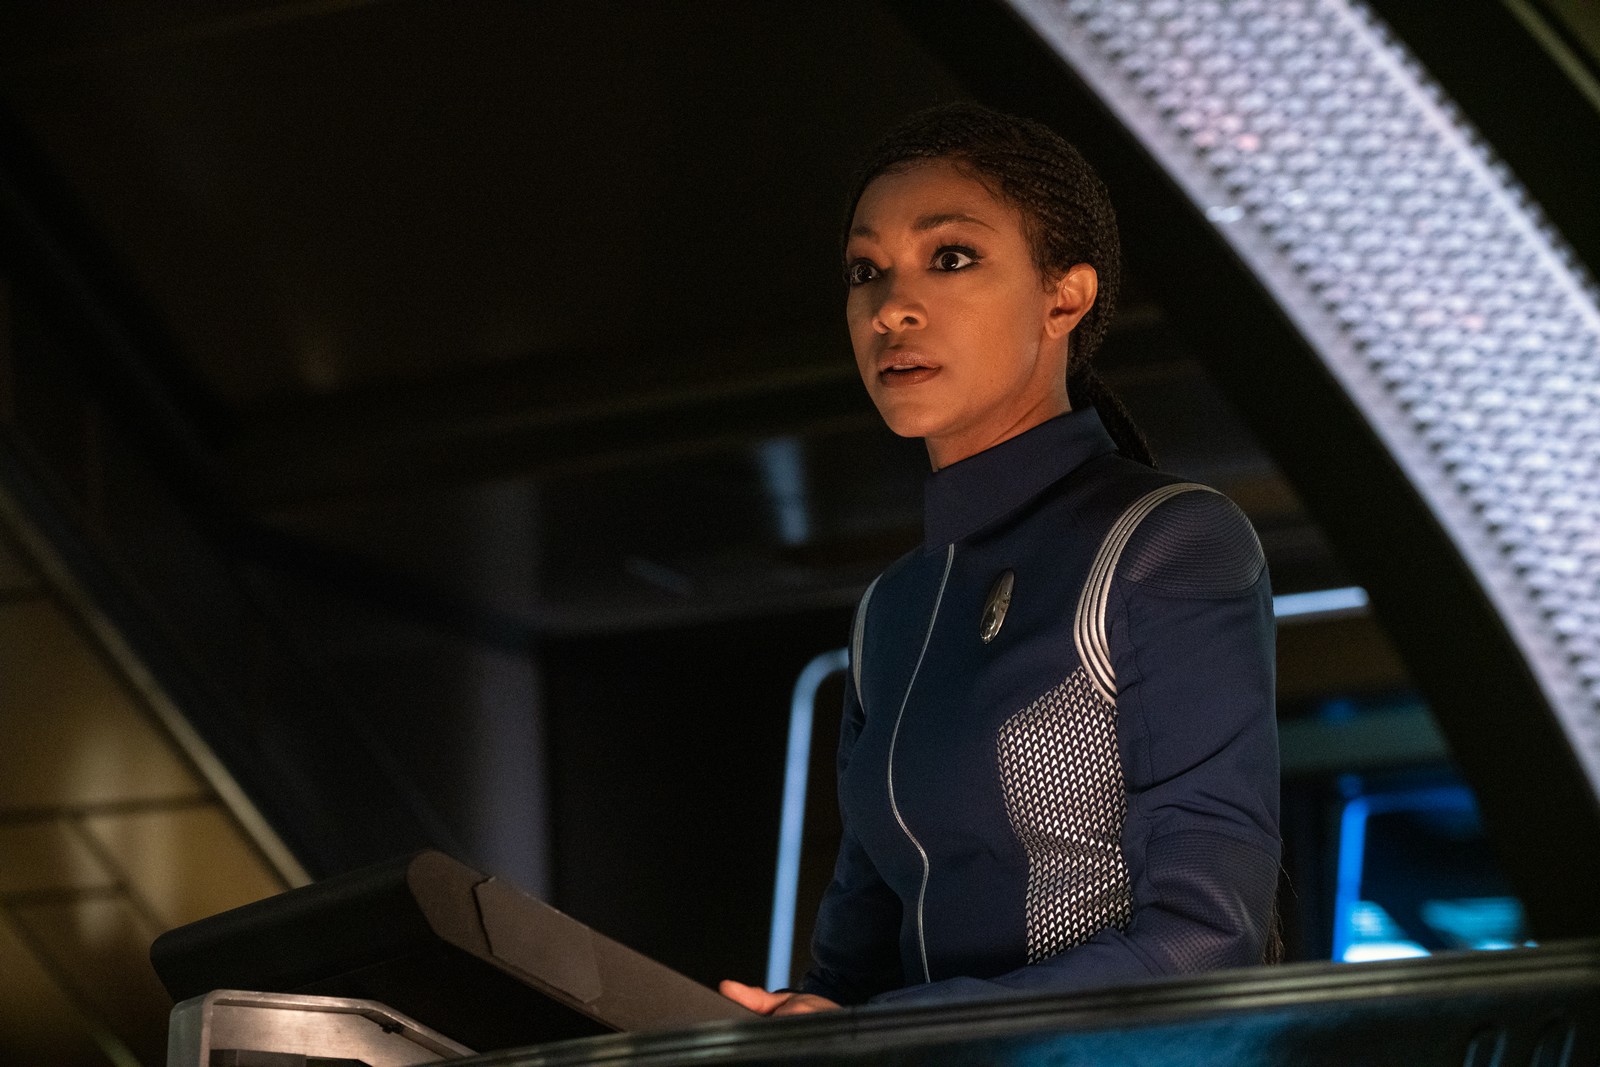 Preview ‘Star Trek: Discovery’ Episode 311 With New Images From “Su’Kal ...